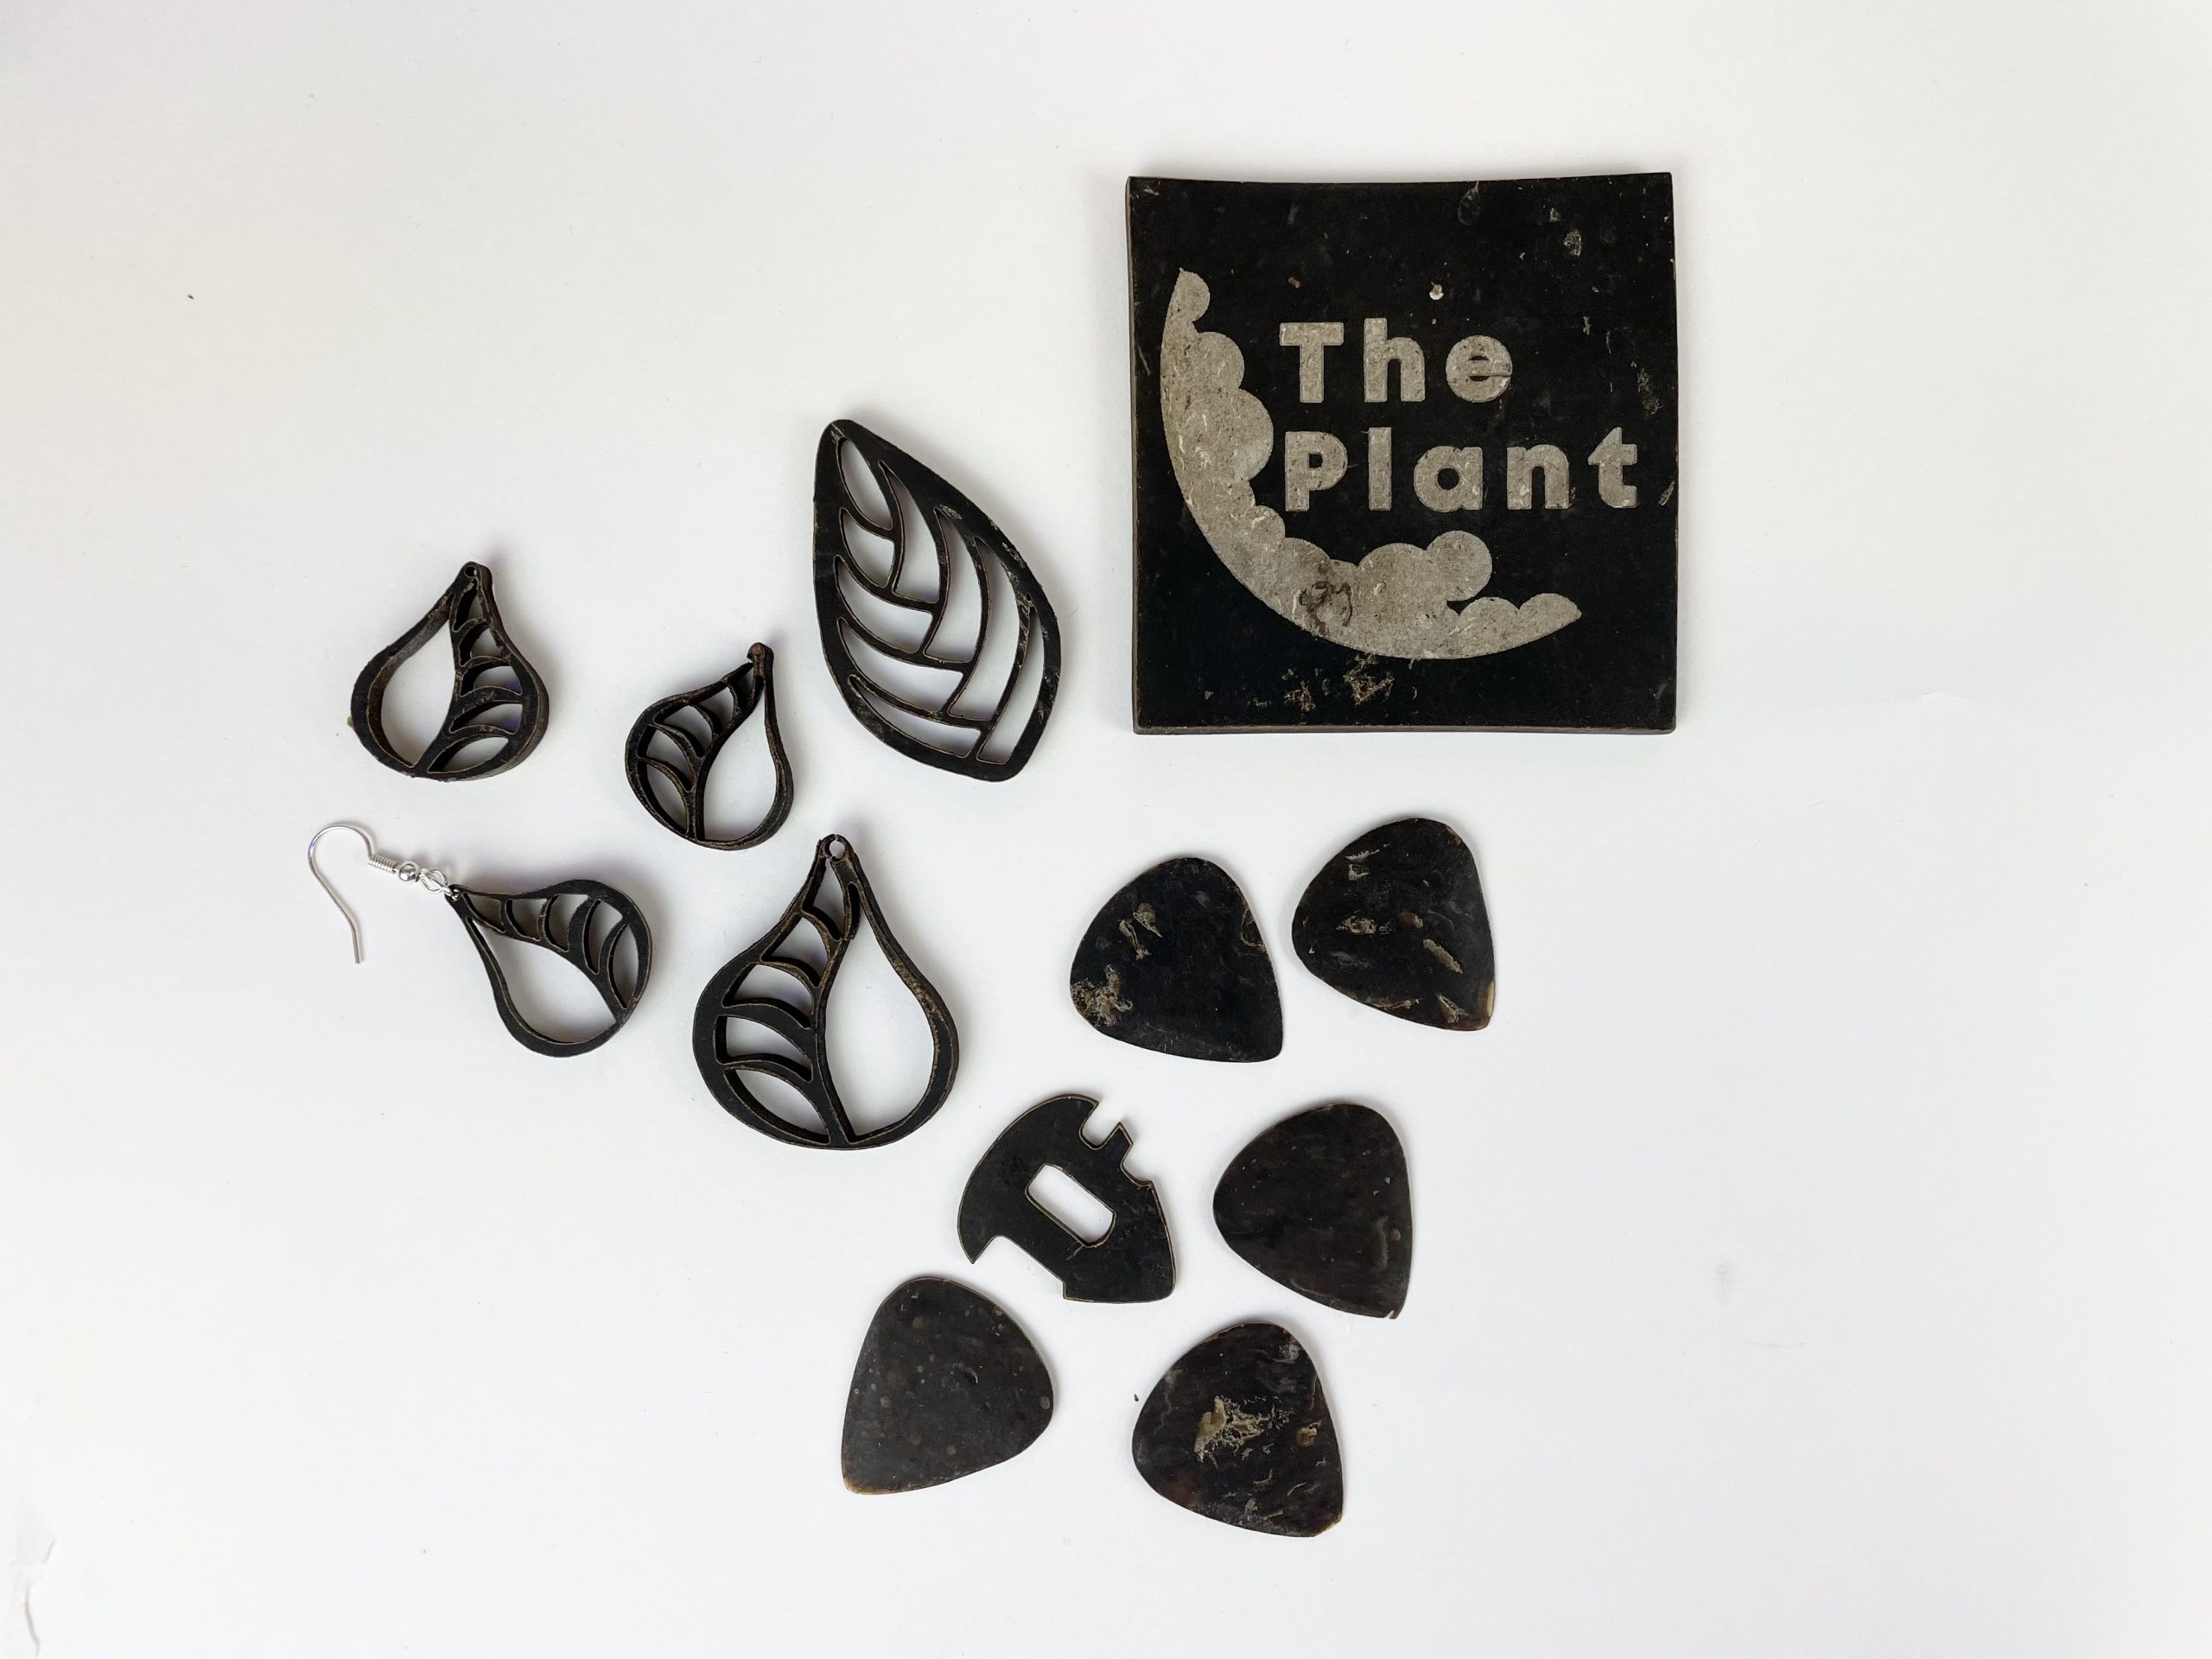 A collection of jewelry, functional guitar picks, and a coaster made from Pyrus wood. Photo via James Dyson Award.